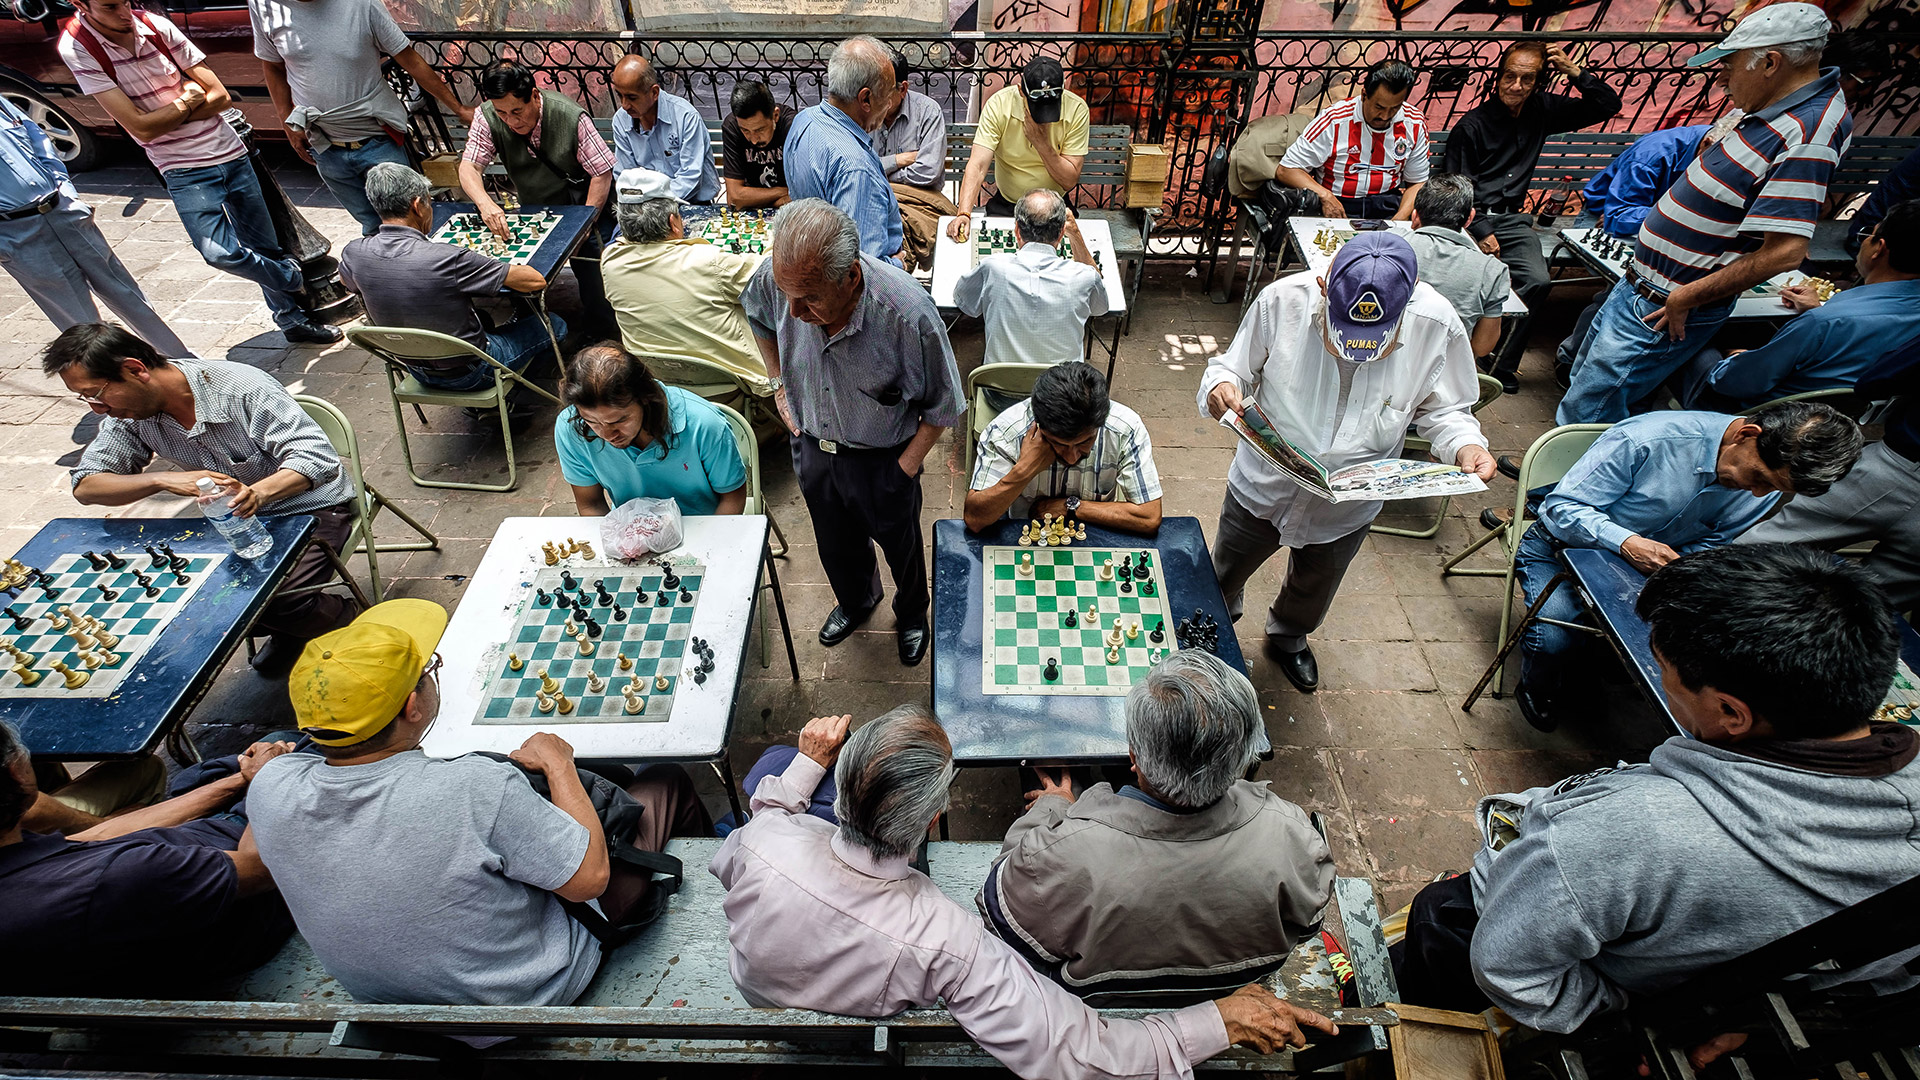 Men congregate in a historic neighborhood in Mexico City to compete in chess.